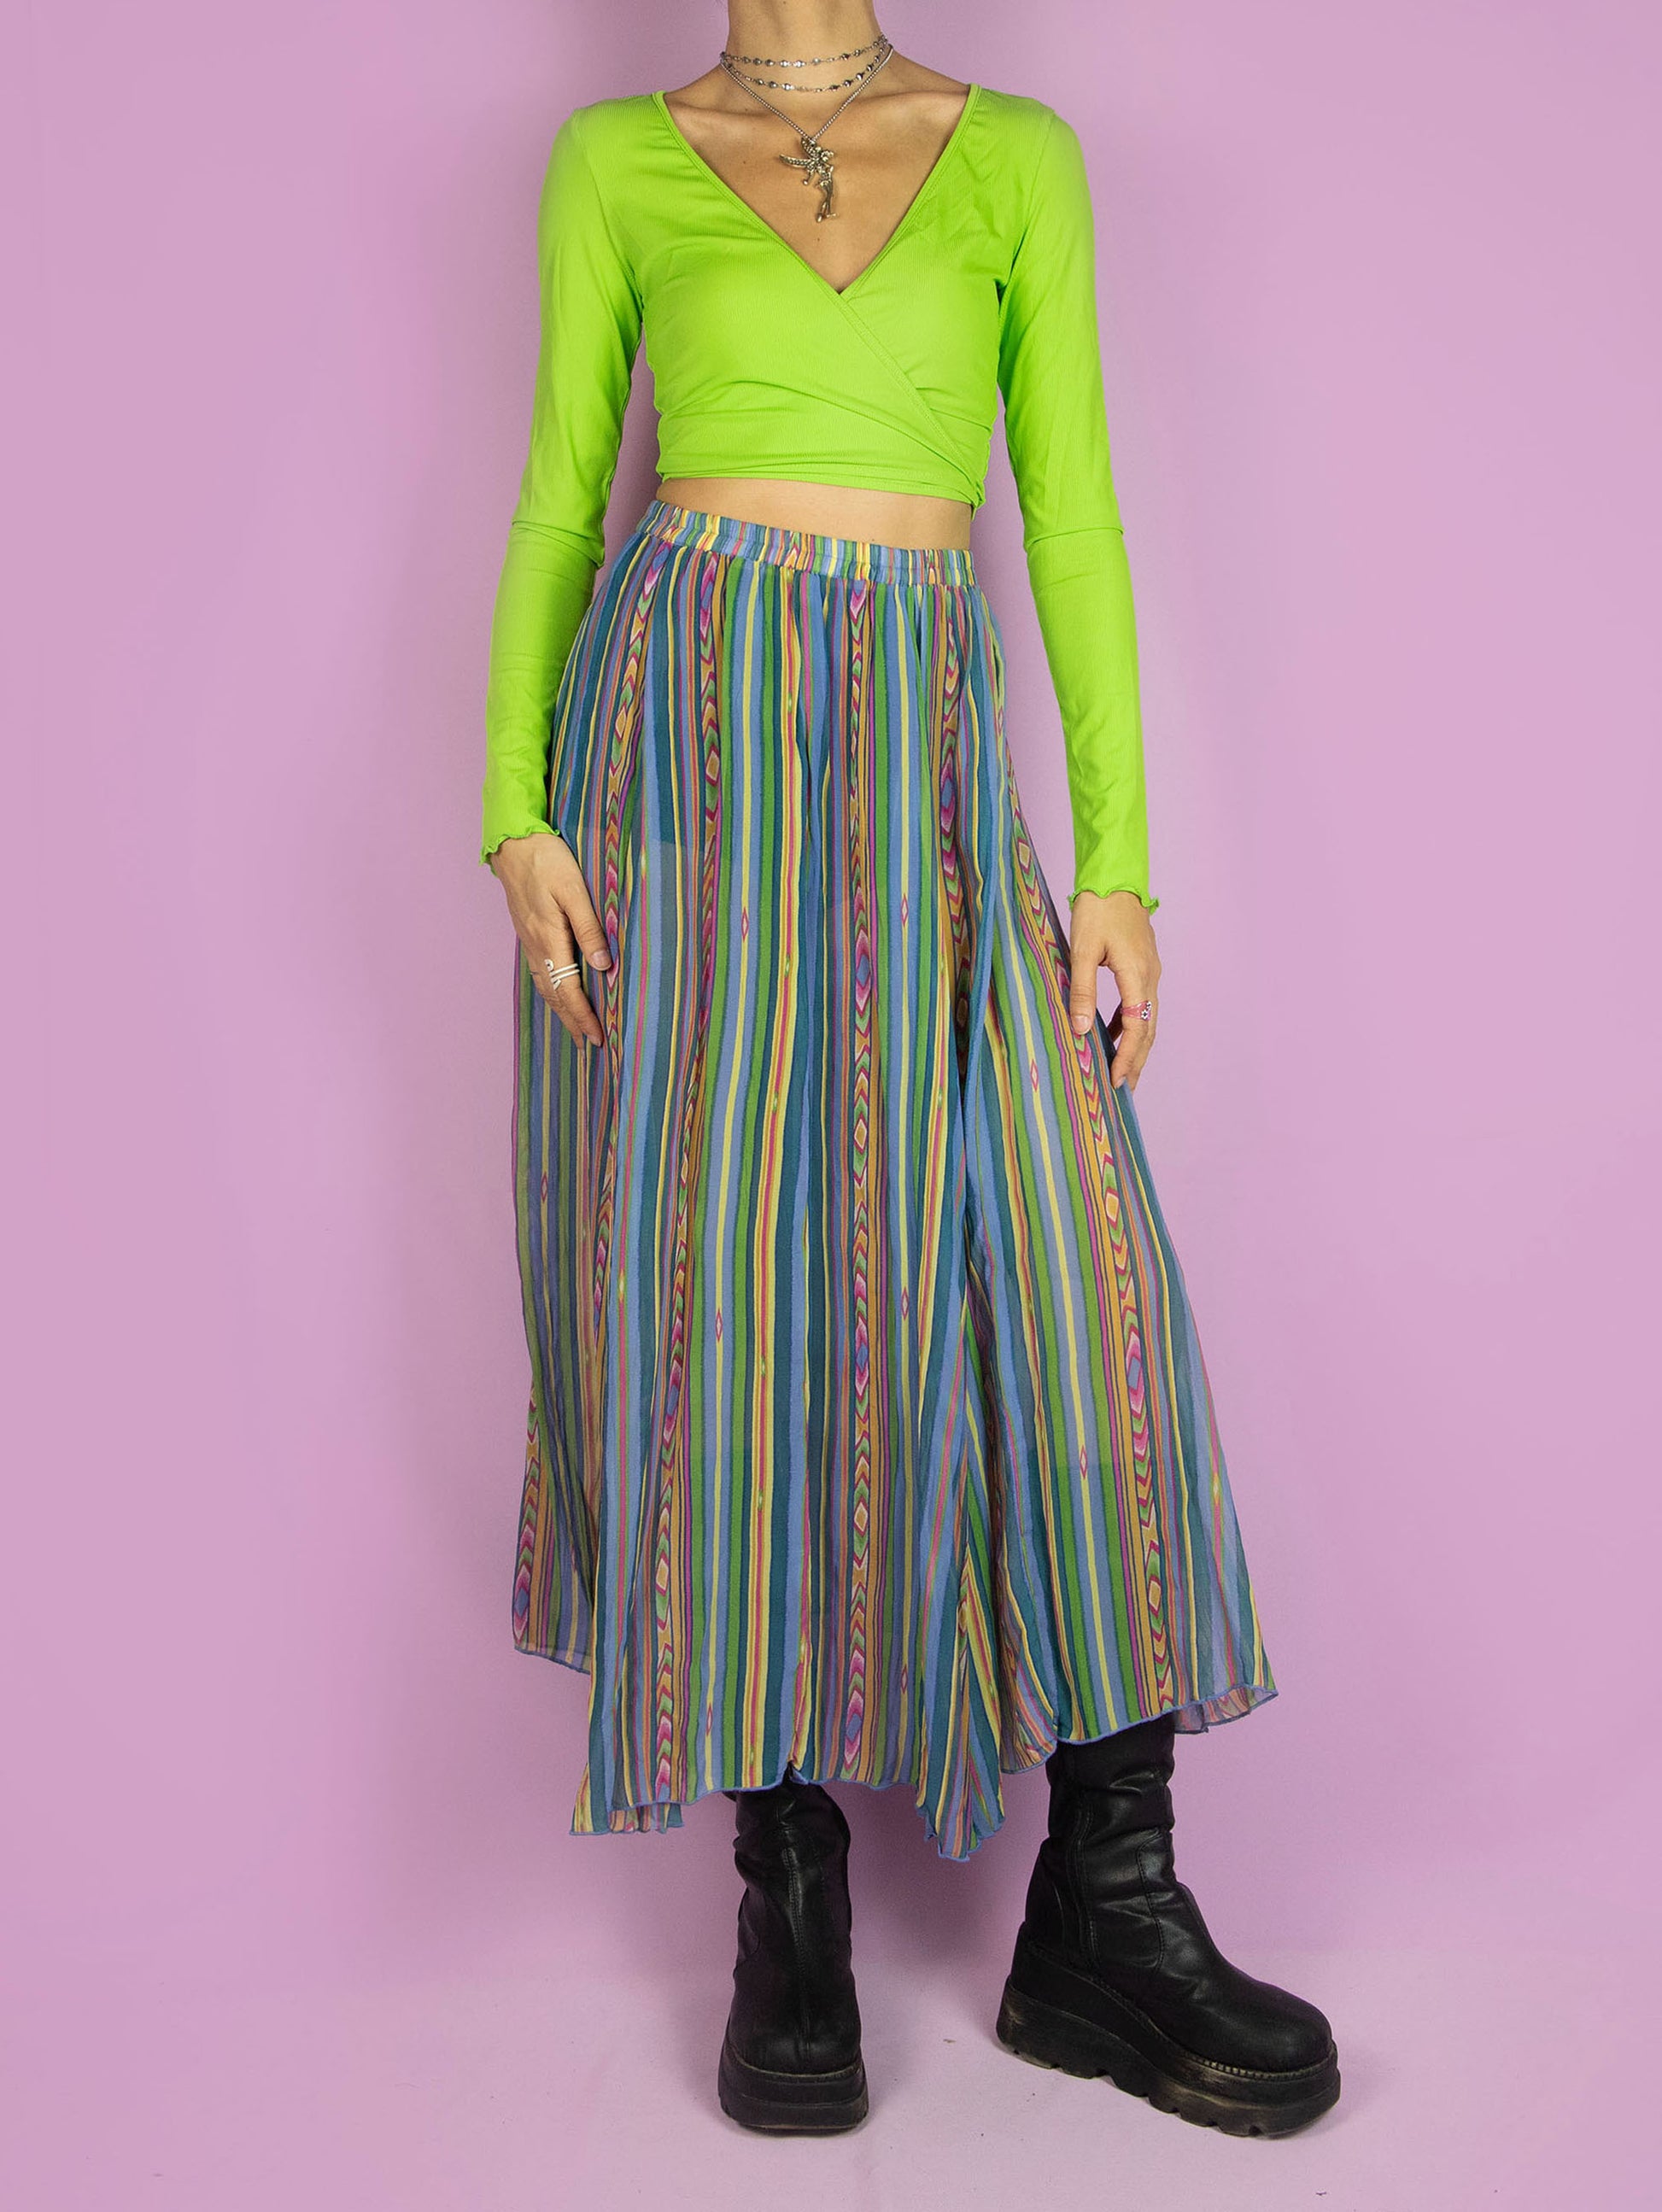 The Vintage 90s Boho Sheer Midi Skirt is a semi-transparent multicolored striped silk skirt with an elastic waistband. Summer beach 1990s flowy cover-up maxi skirt.